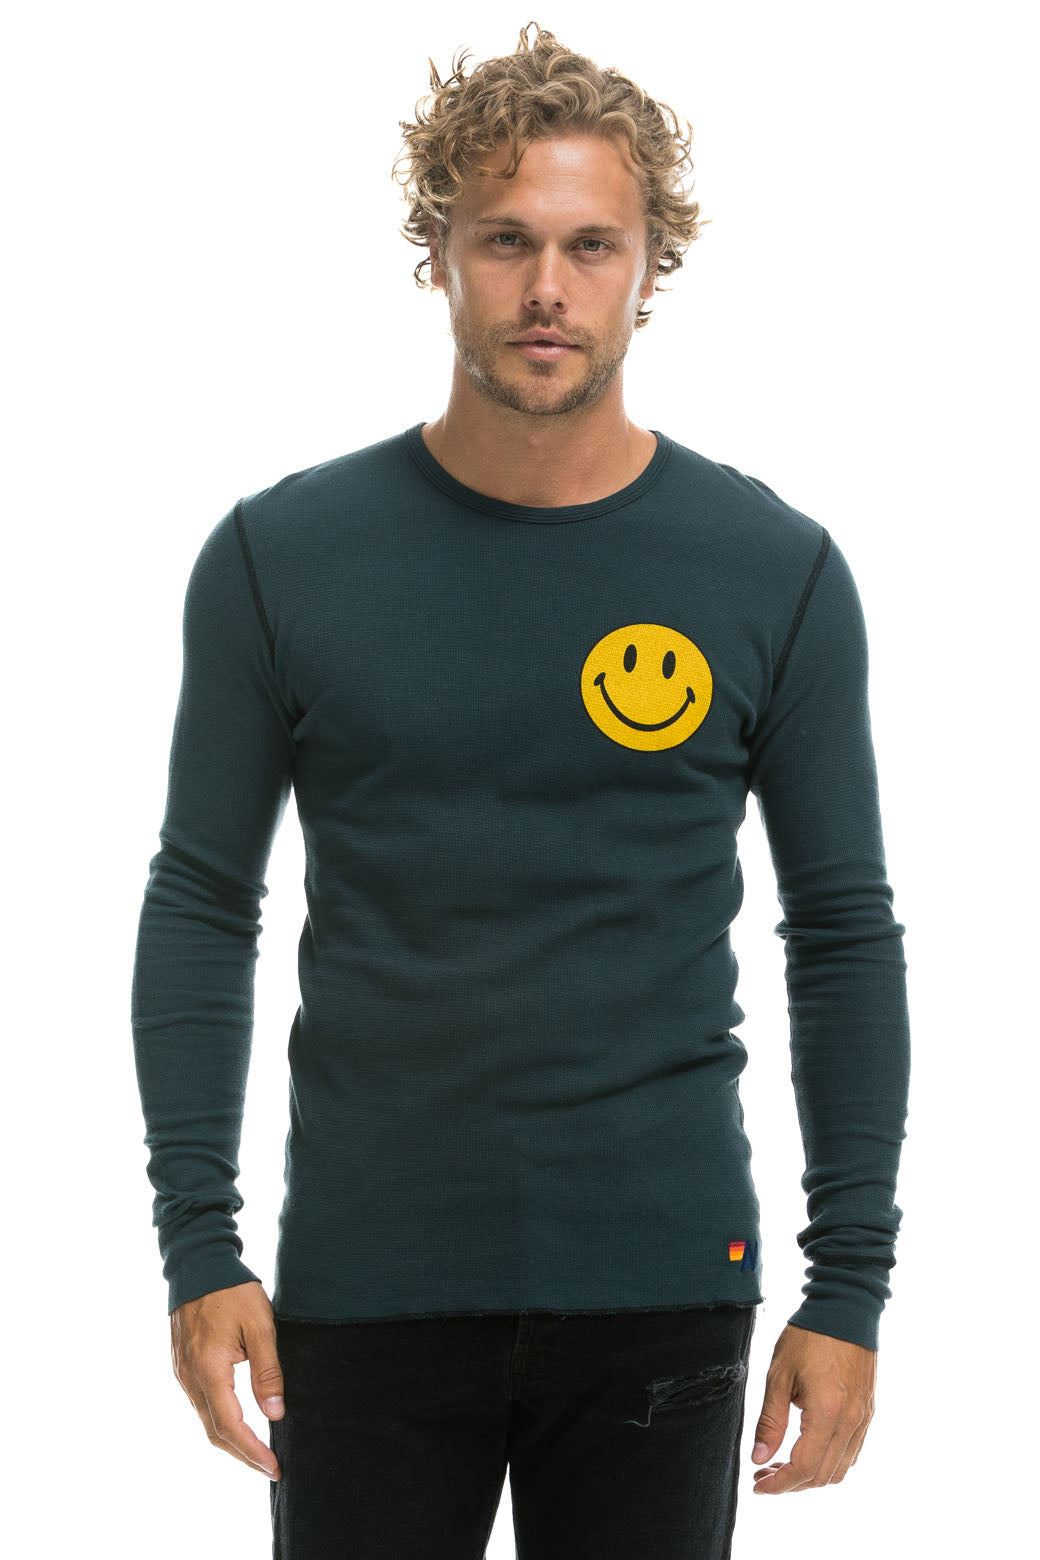 SMILEY 2 THERMAL - CHARCOAL Thermal Aviator Nation 